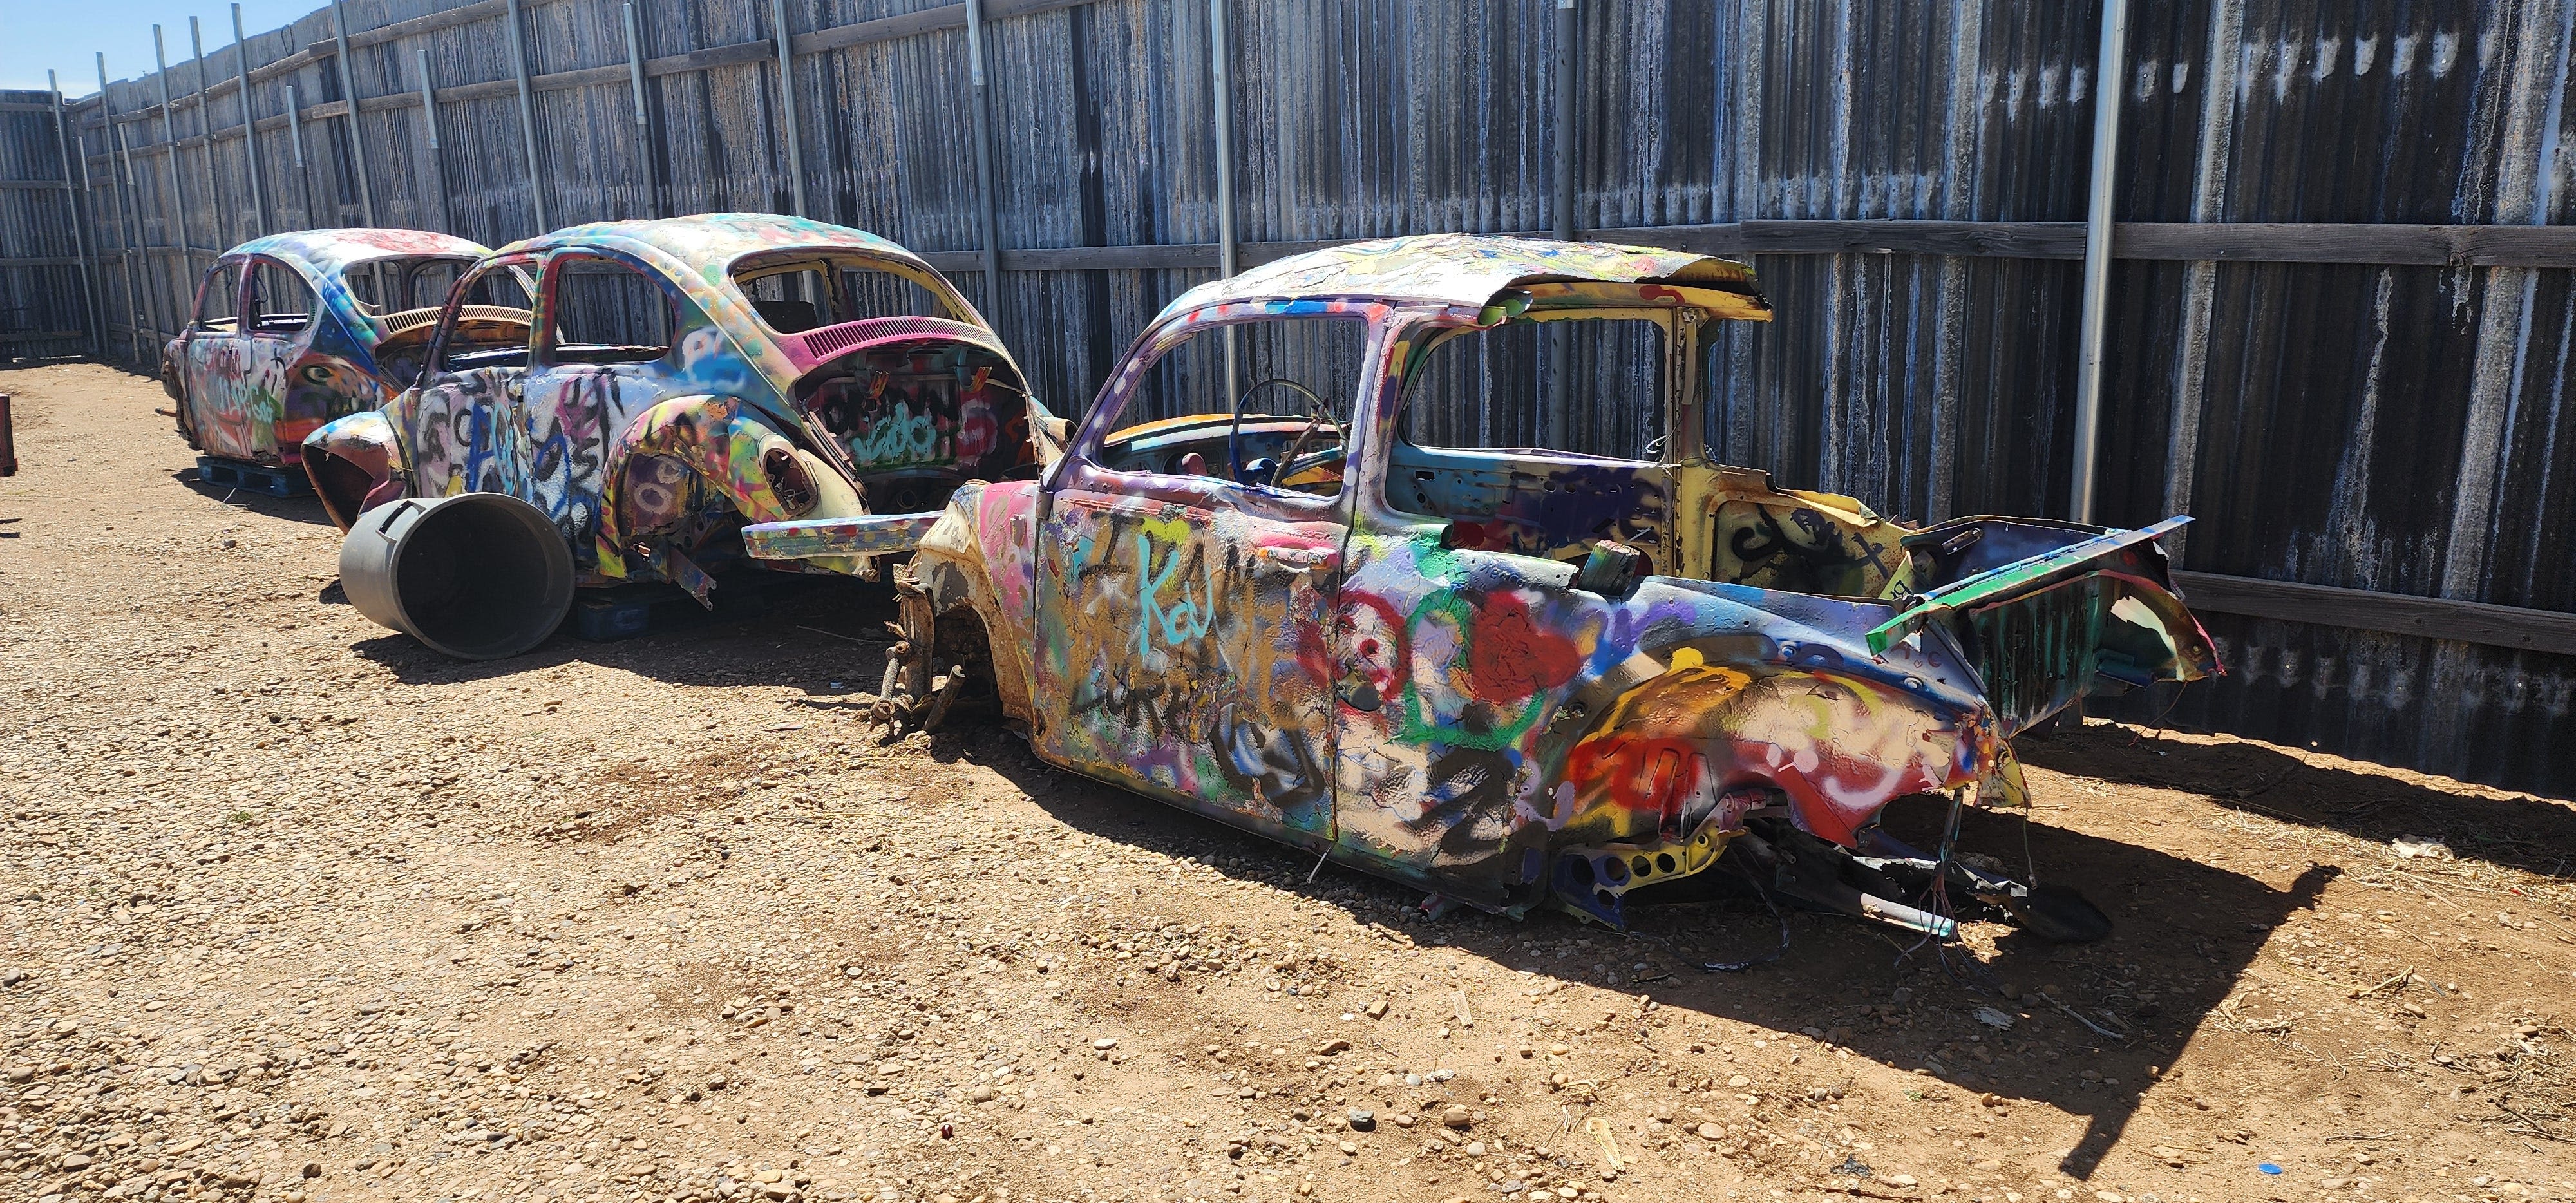 Slug Bug Ranch to open in Amarillo in June: Here's what we know.